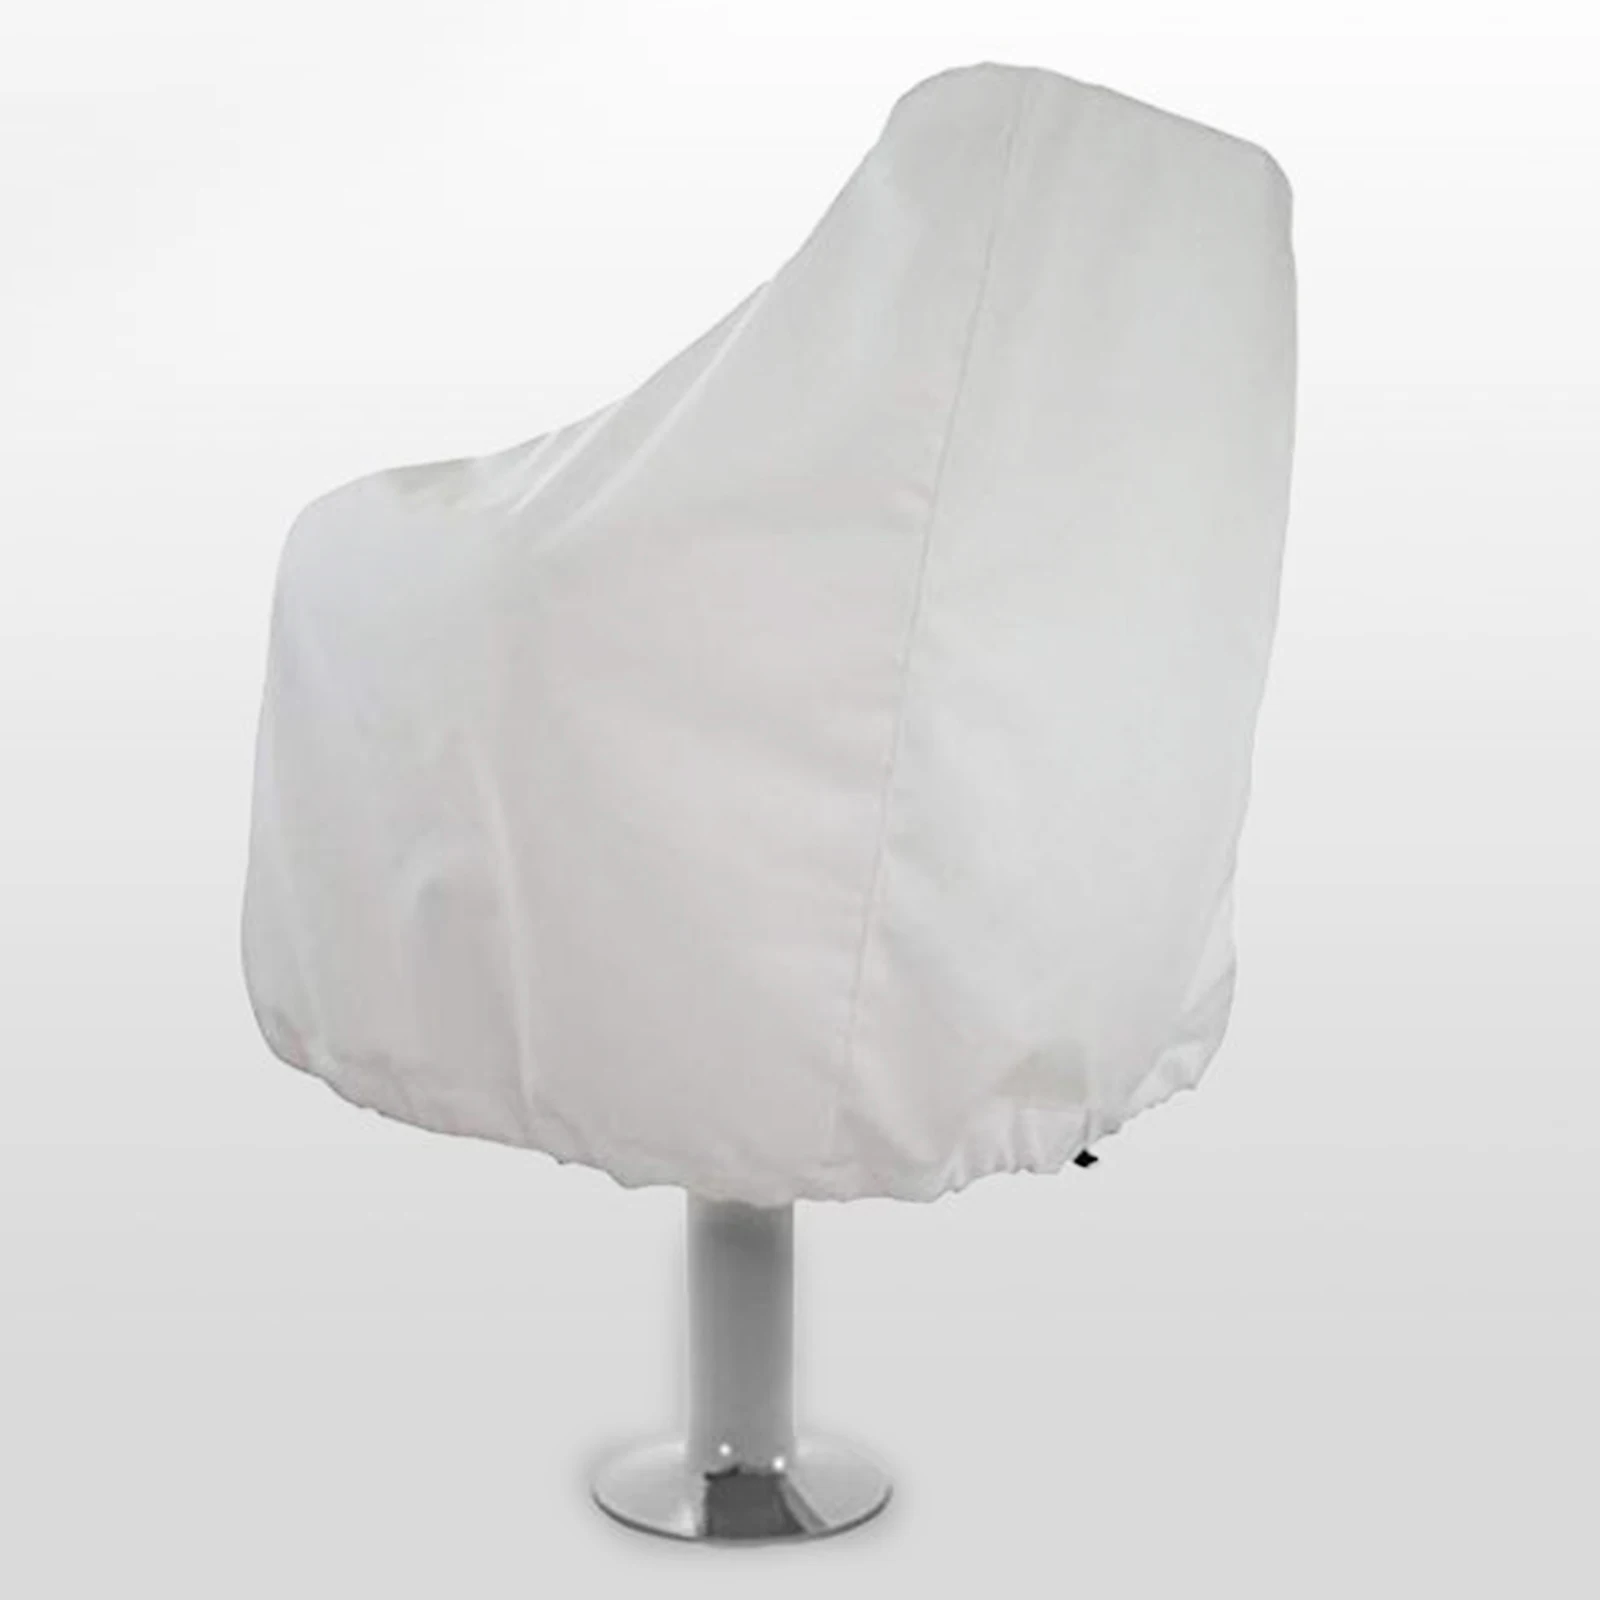 Boat Seat Cover Outdoor Protection Furniture Dust Yacht Foldable Waterproof UV Resistant Chair/Table Furniture Cover